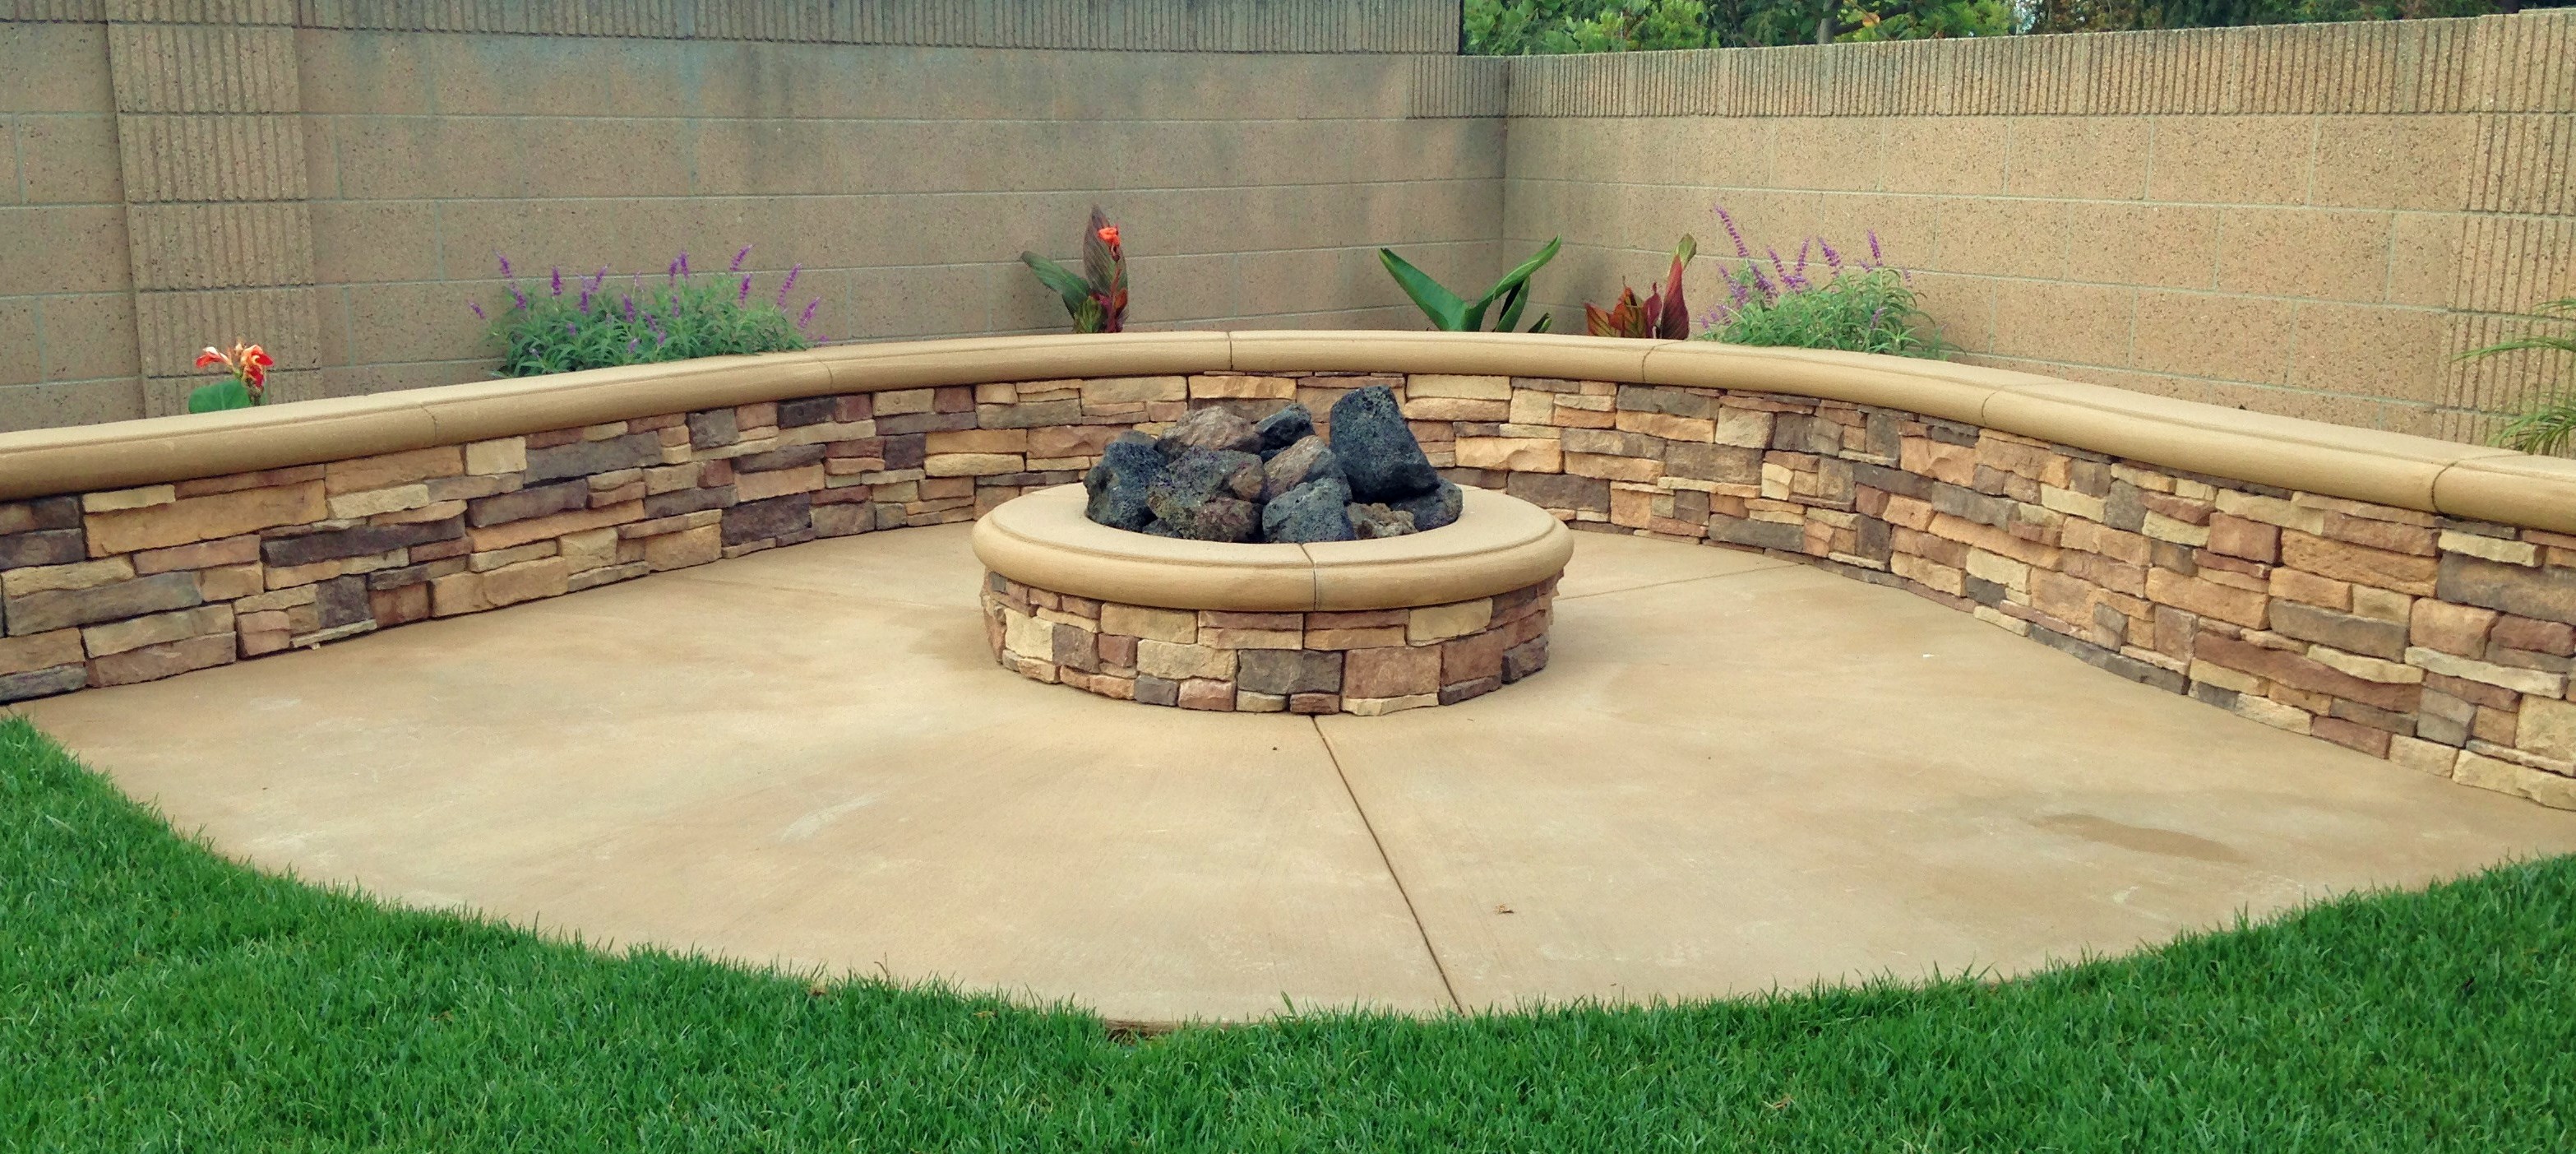 Fire Pits Orange County Patio Areas, Fire Pit On Concrete Slab